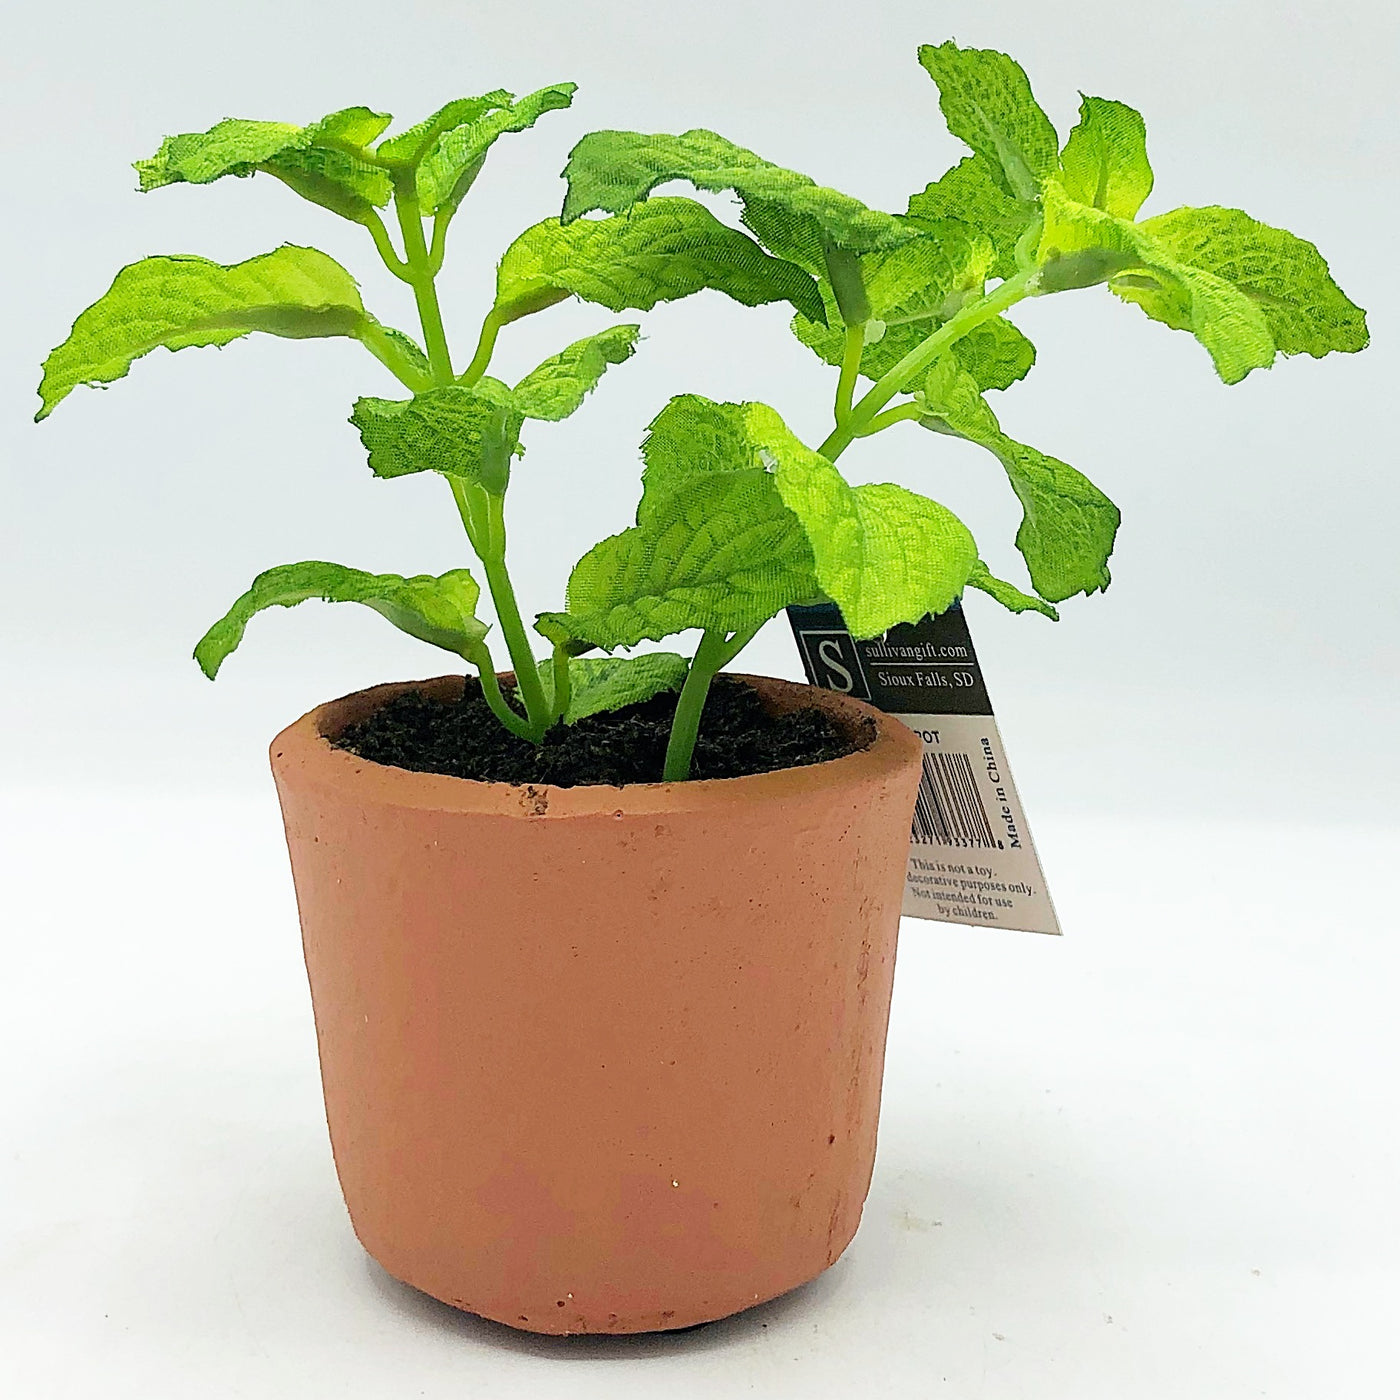 Mint Faux Herb 6" Plant in Clay Pot